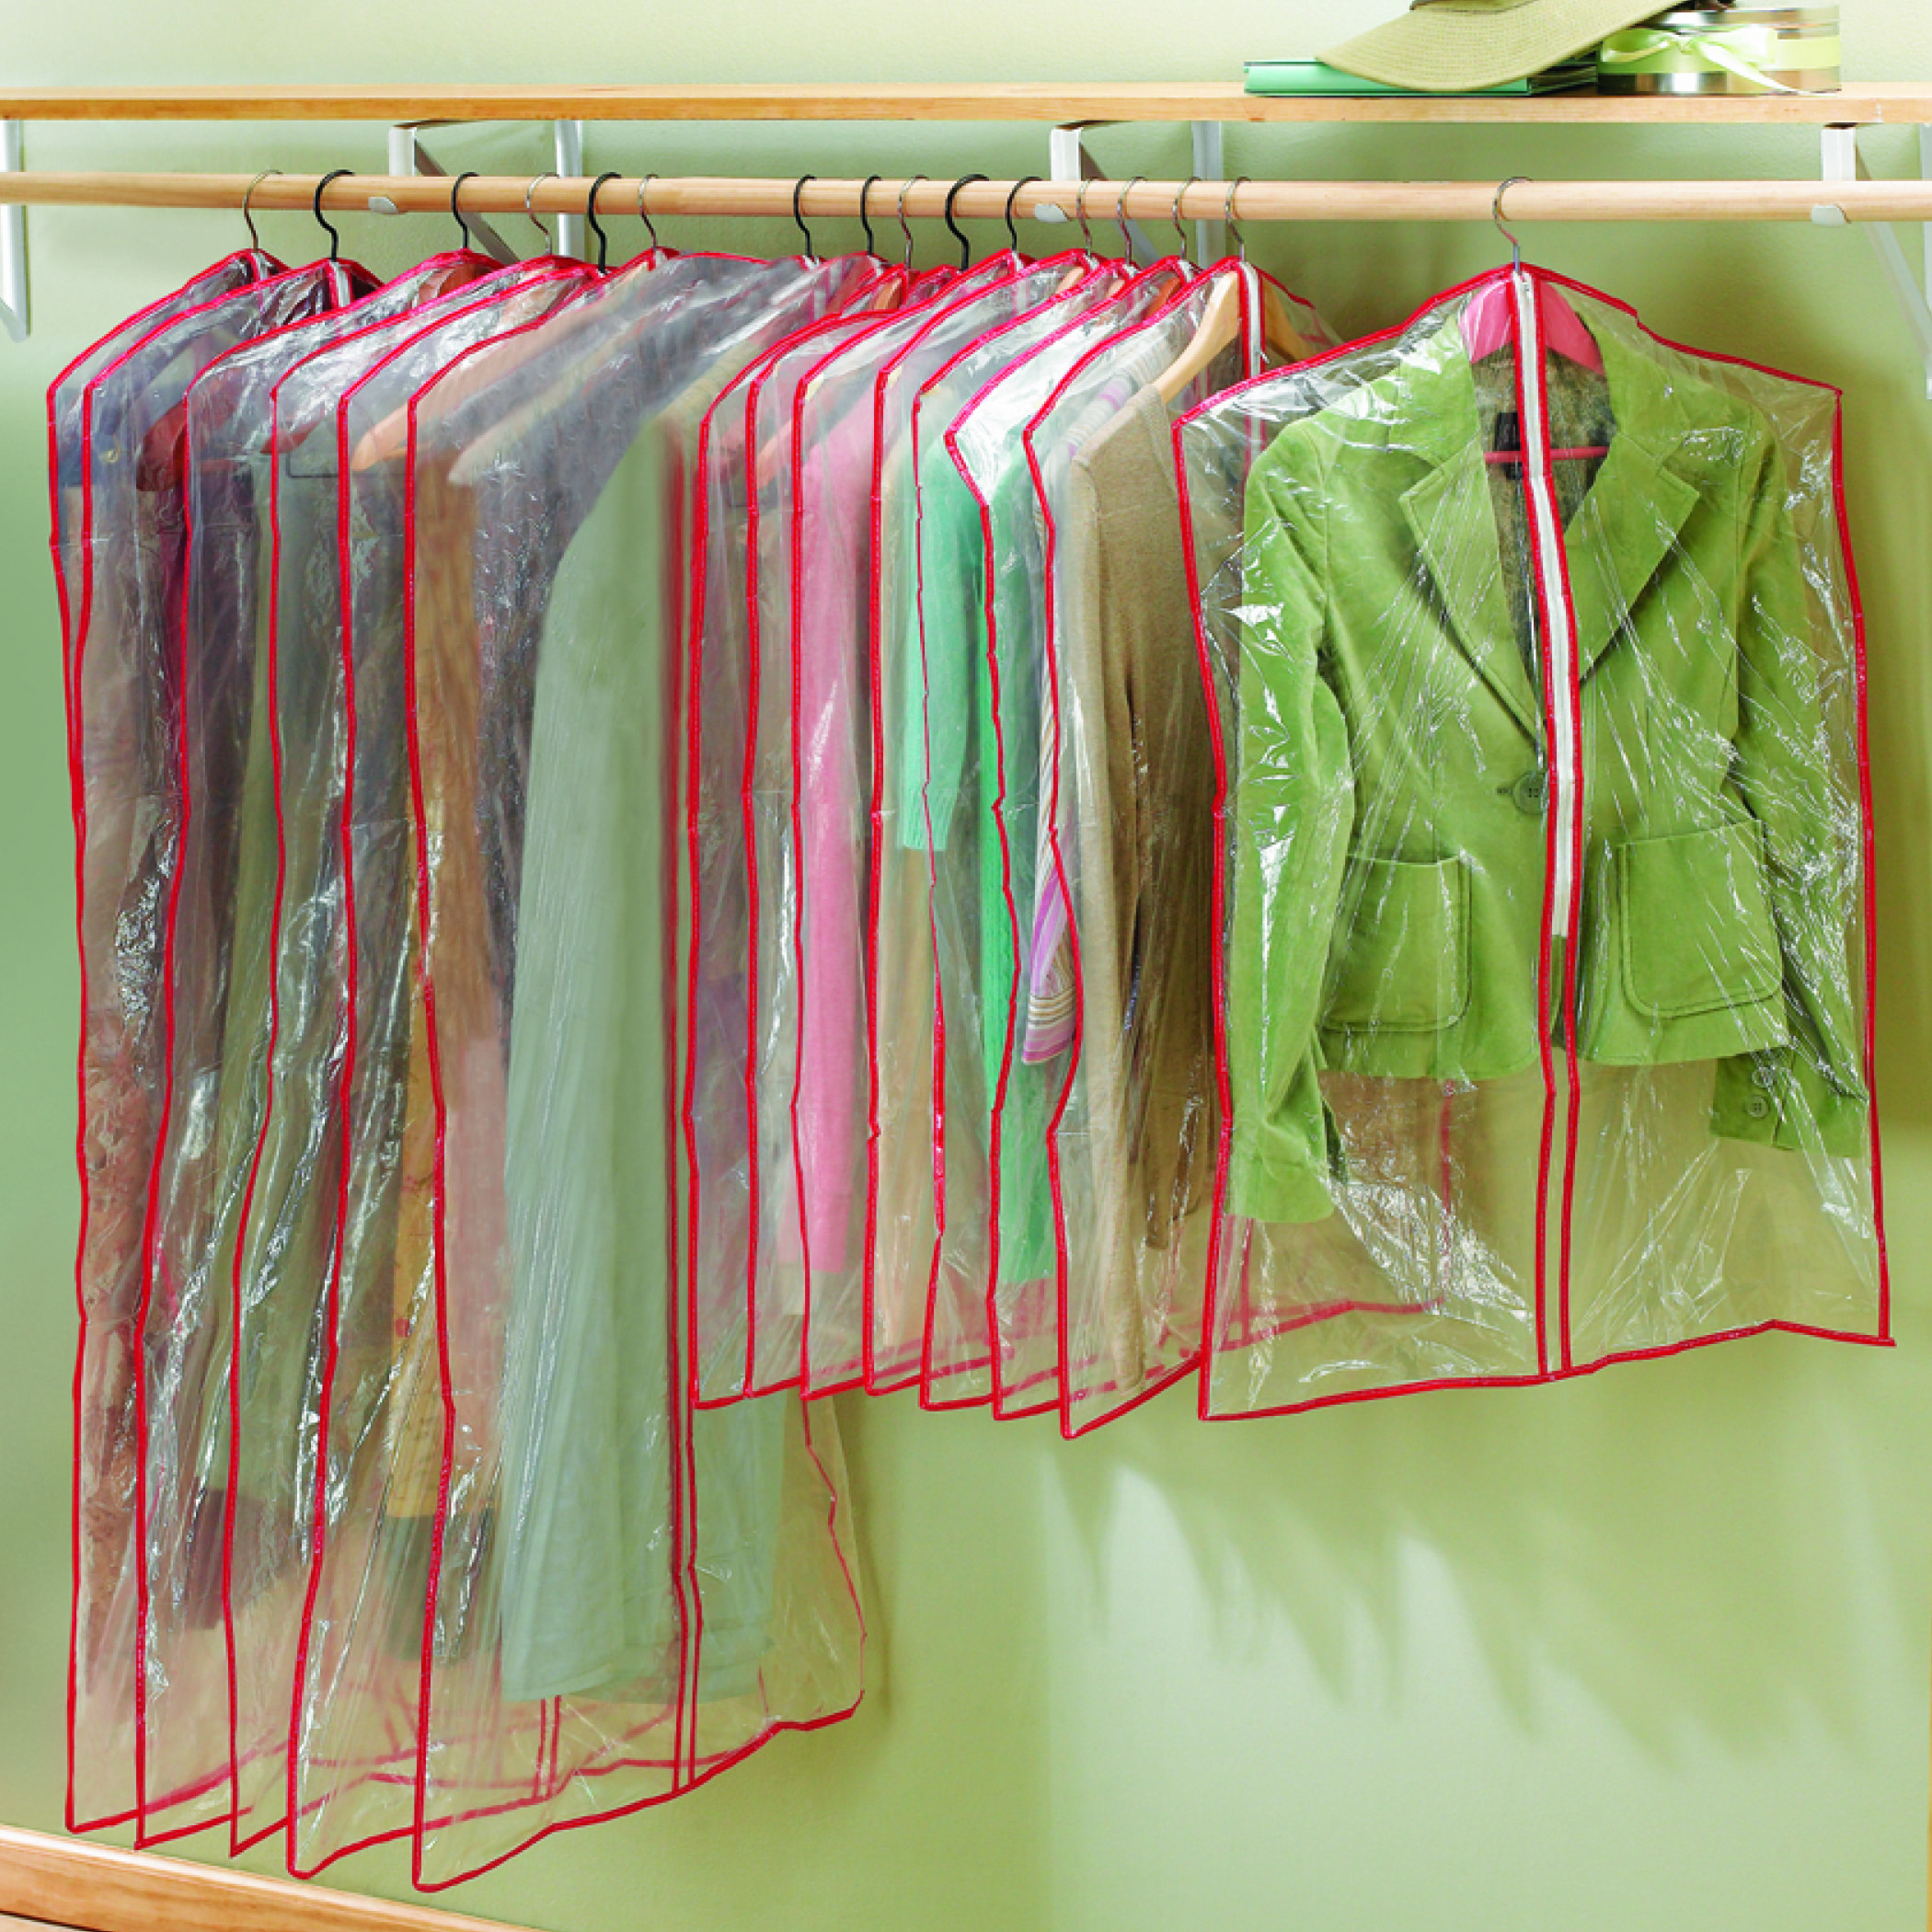 5 pcs/pack 4 sizes Available Garment Bags for Hanging Clothes Storage -  Suit Bag with Zipper, Dress Bag Dust Cover - Clear Storage Bags for  Clothing S